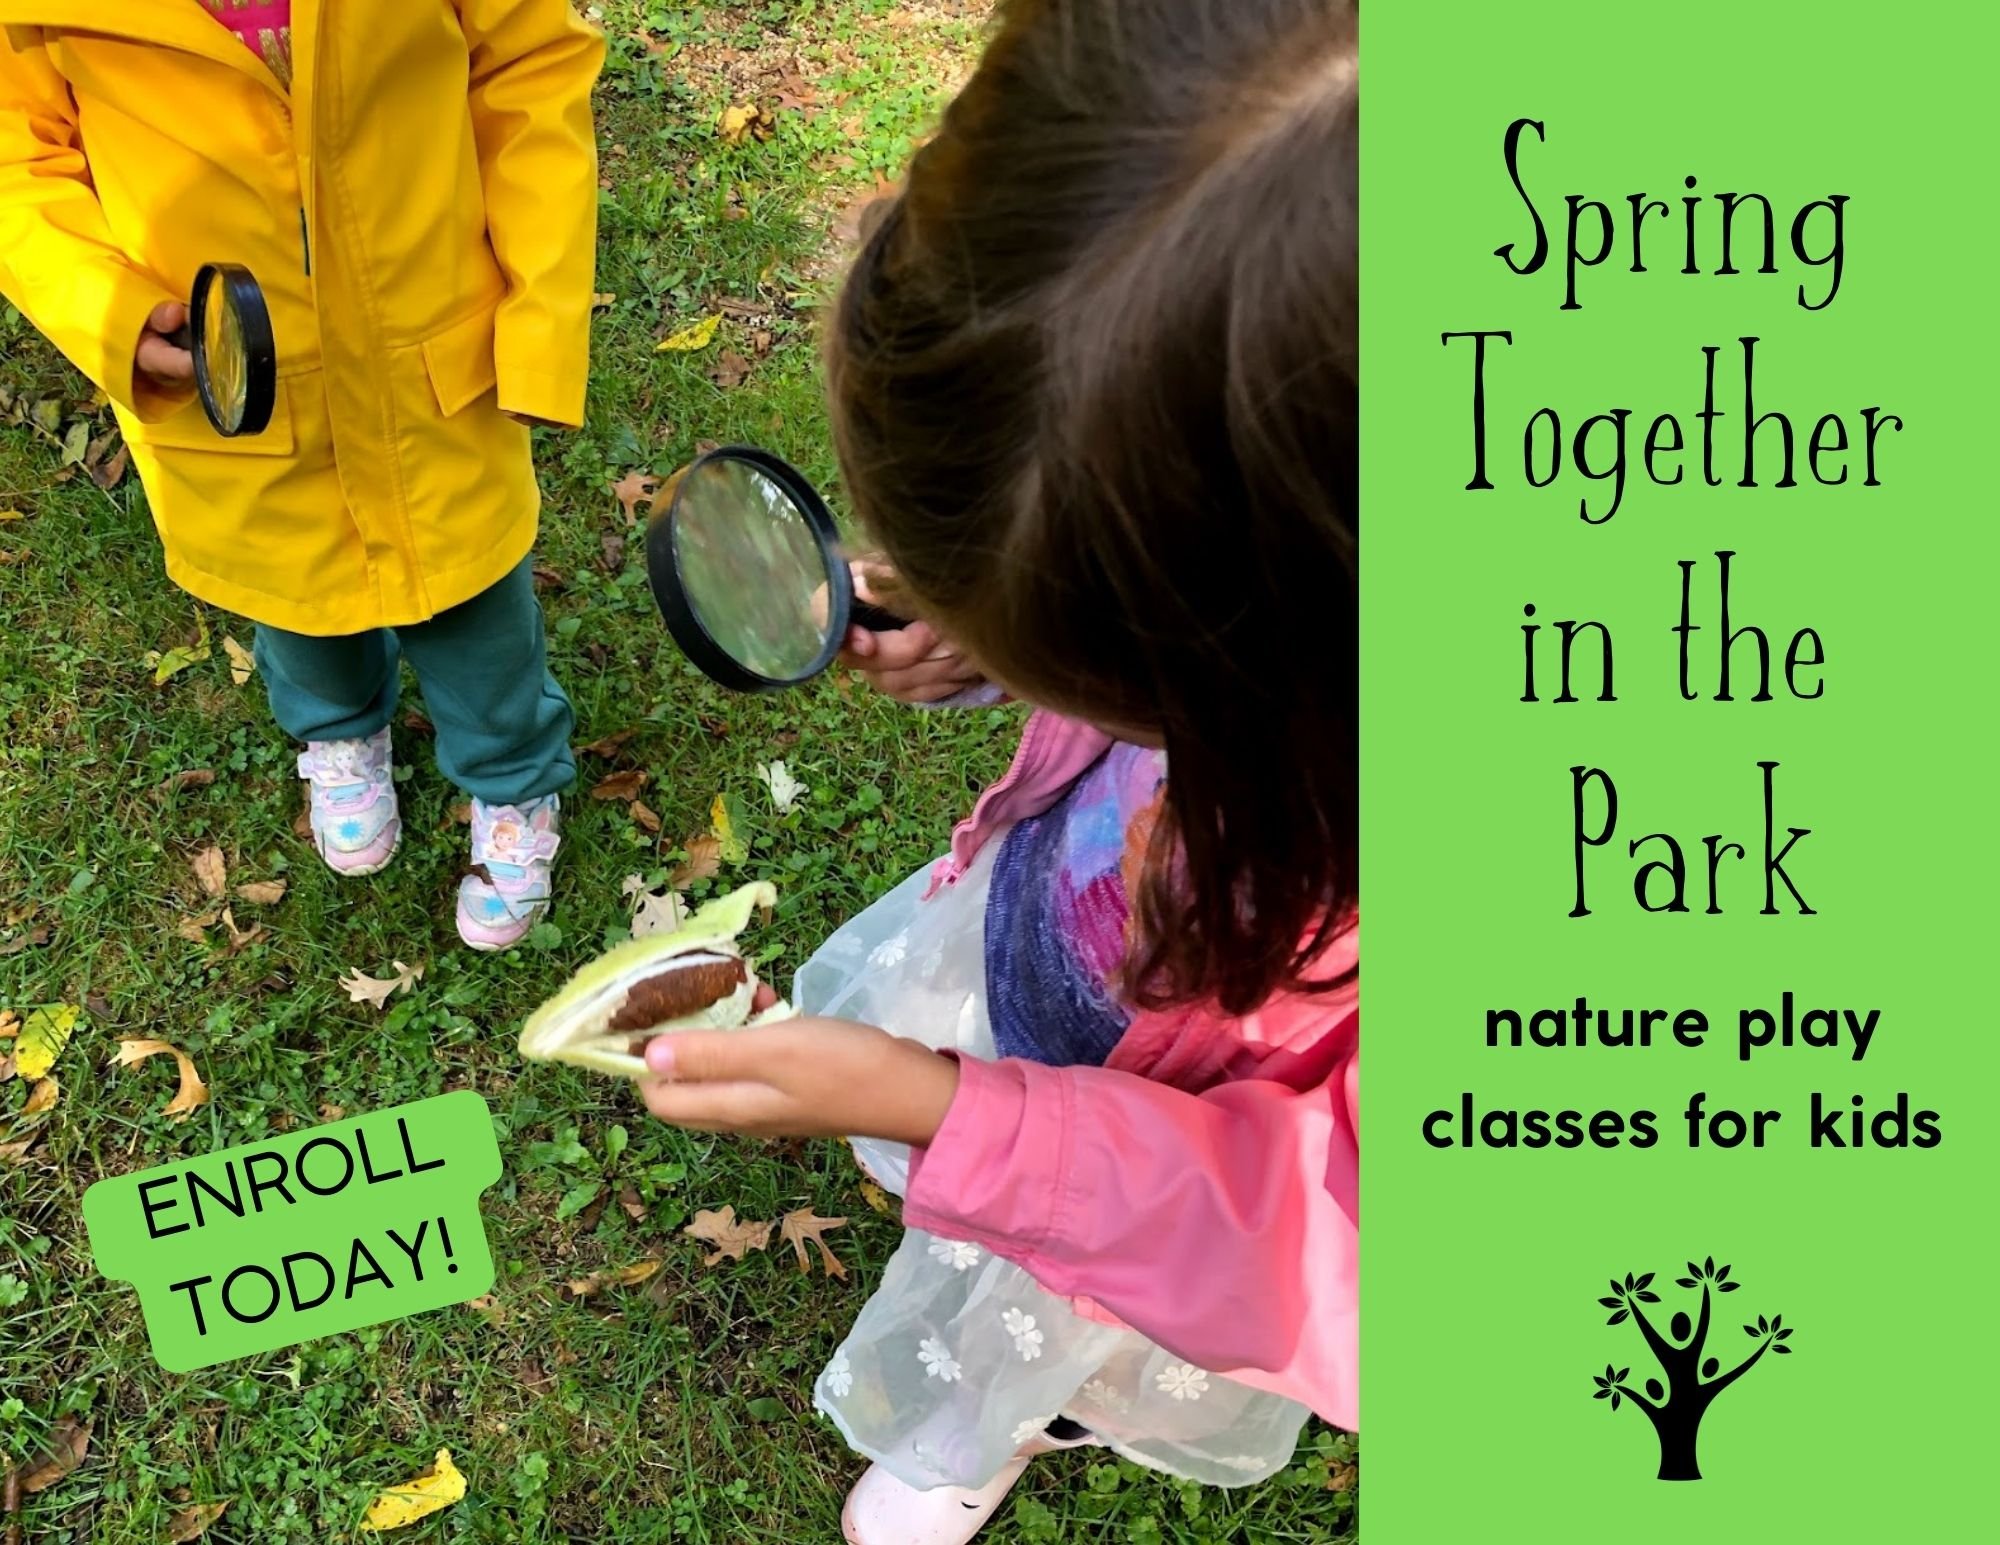 Spring Together in the Park nature play classes for kids-3.jpg